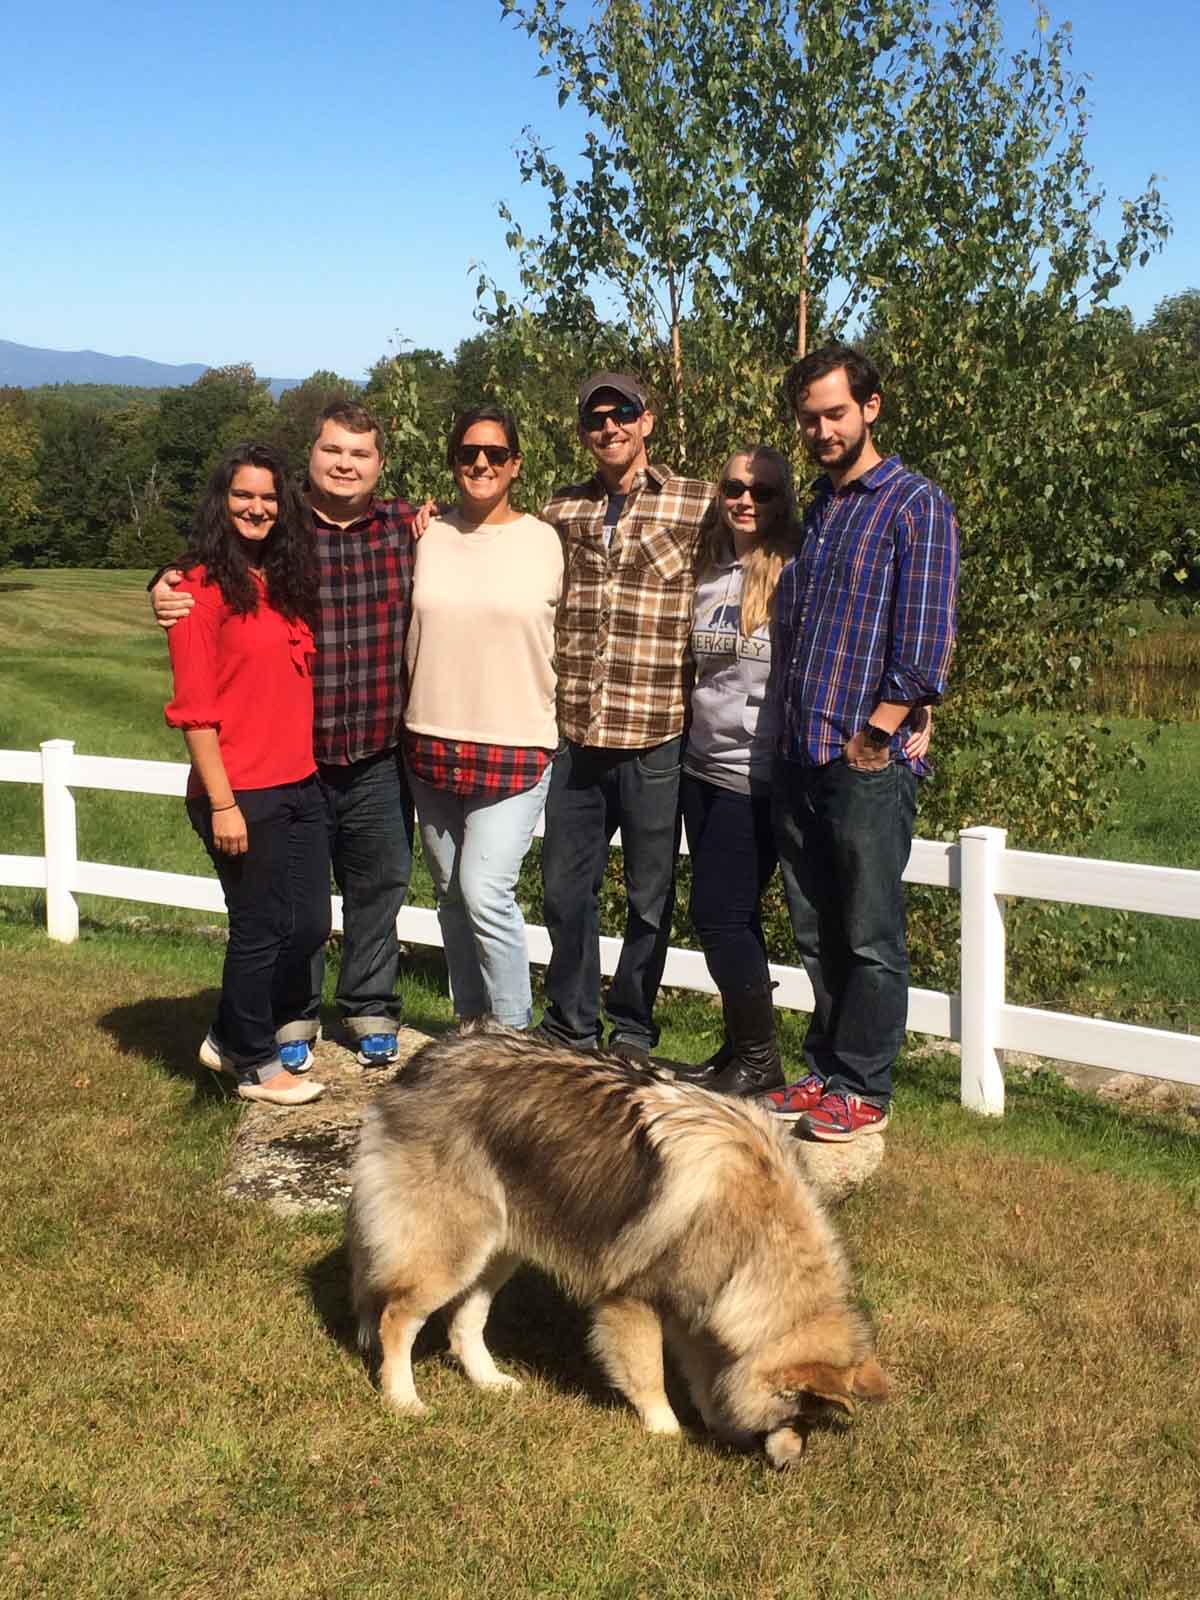 New Hampshire Apple Picking with friends